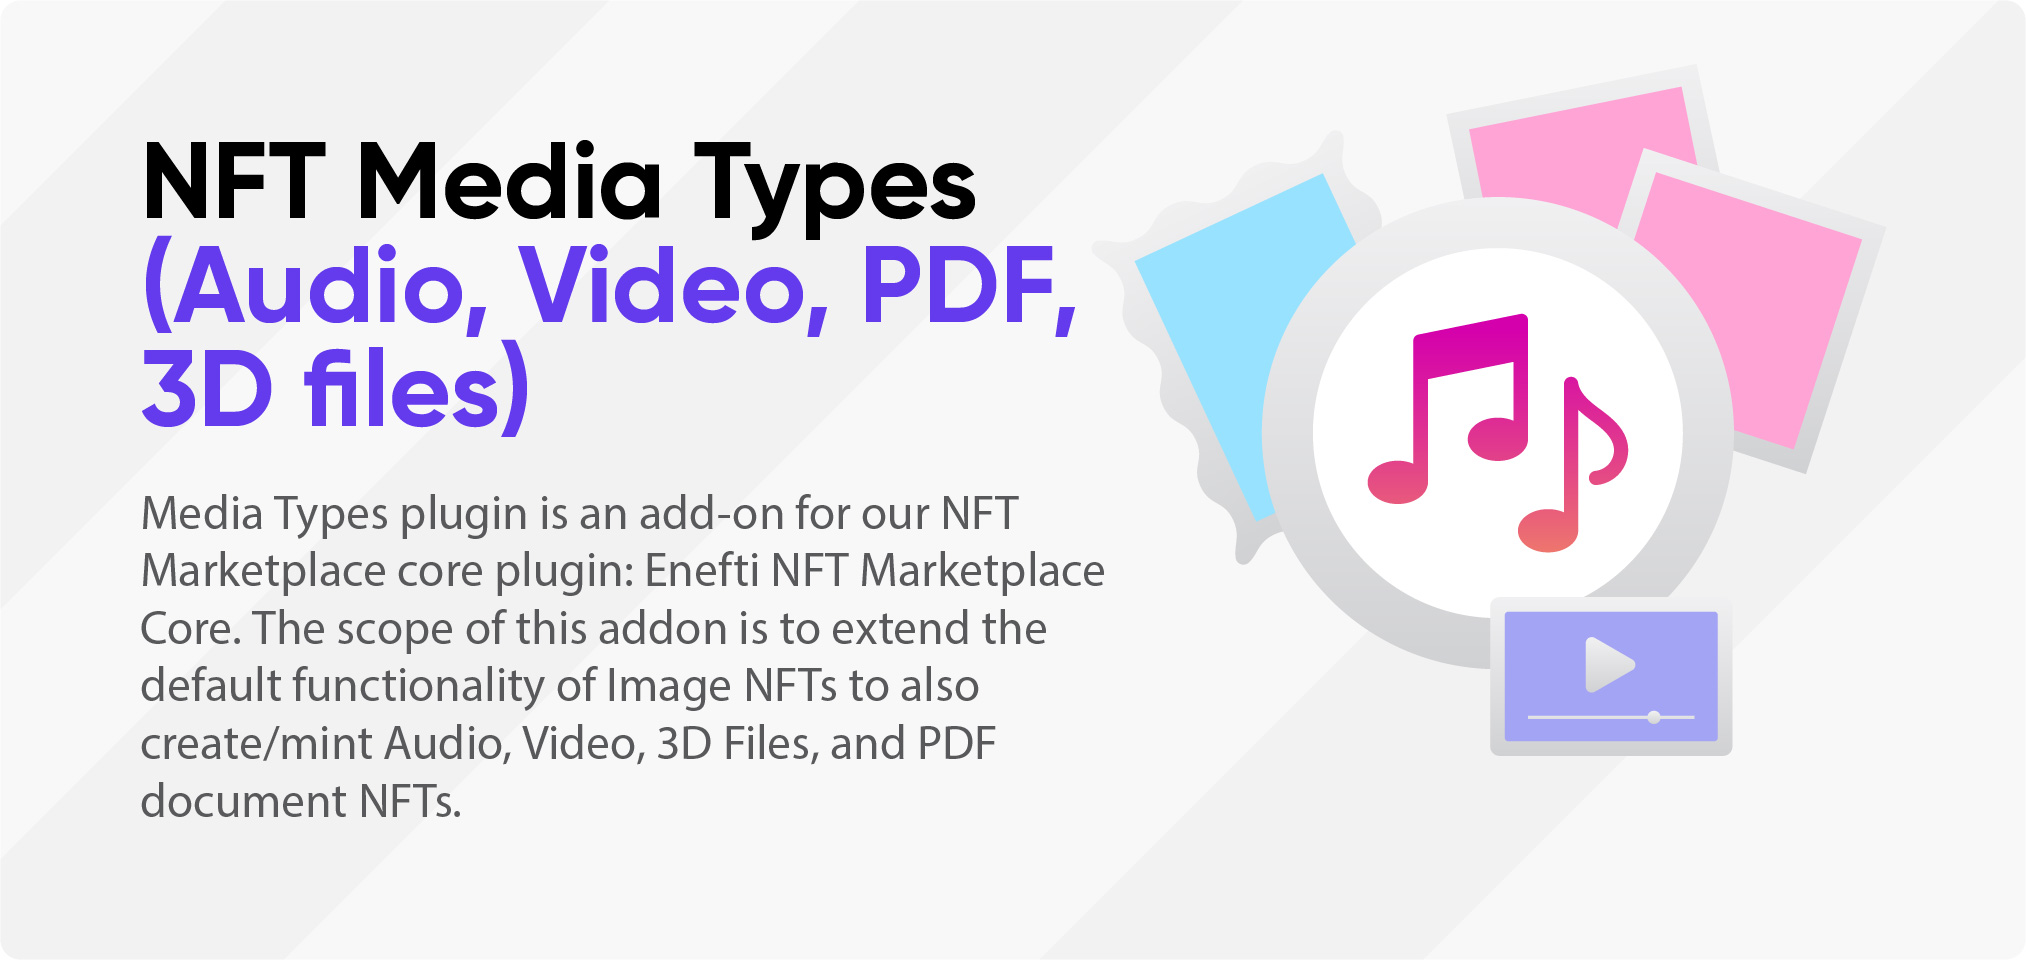 NFT Media Types (Audio, Video, PDF, 3D Files) Media Types plugin is an add-on for our NFT Marketplace core plugin: Enefti NFT Marketplace Core. The scope of this addon is to extend the default functionality of Image NFTs to also create/mint Audio, Video, 3D Files, and PDF document NFTs.